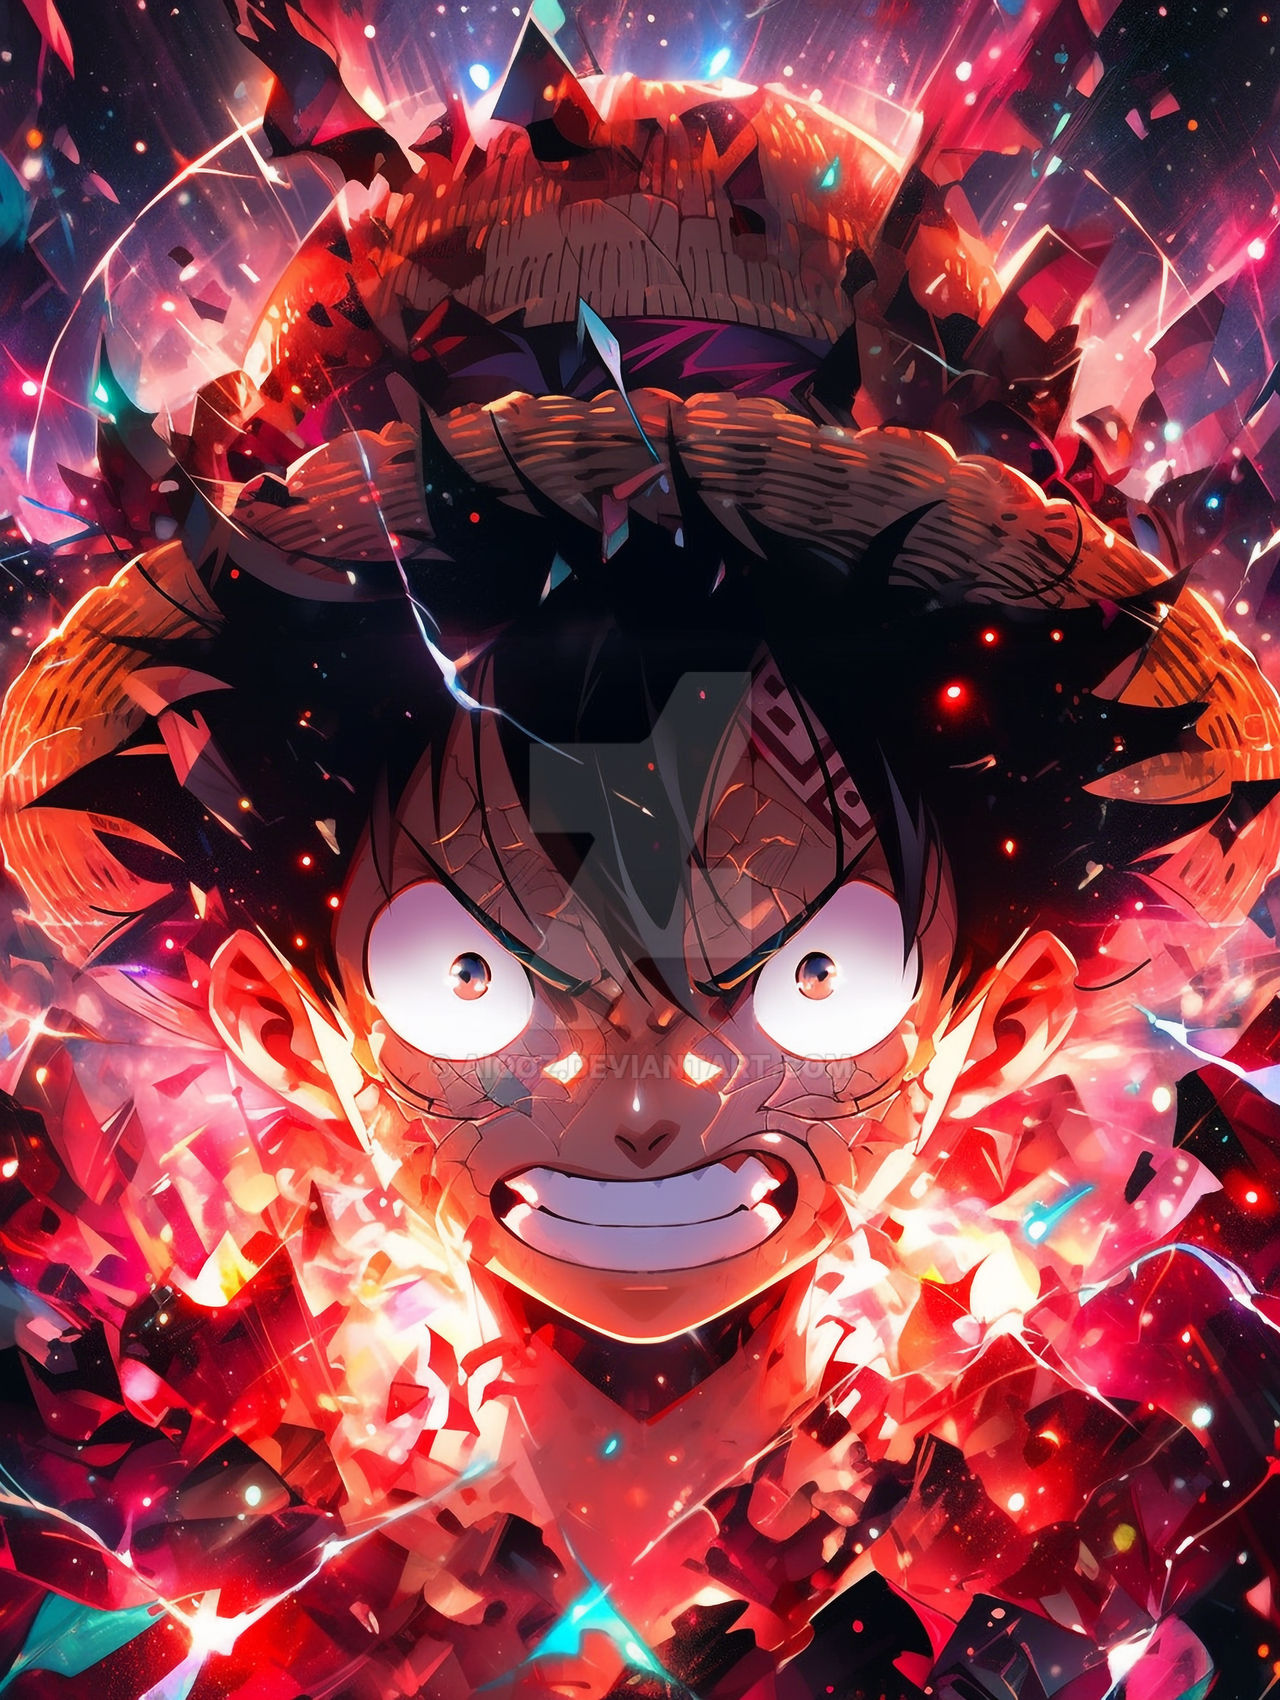 Monkey D. Luffy - One Piece by Aiqoz on DeviantArt